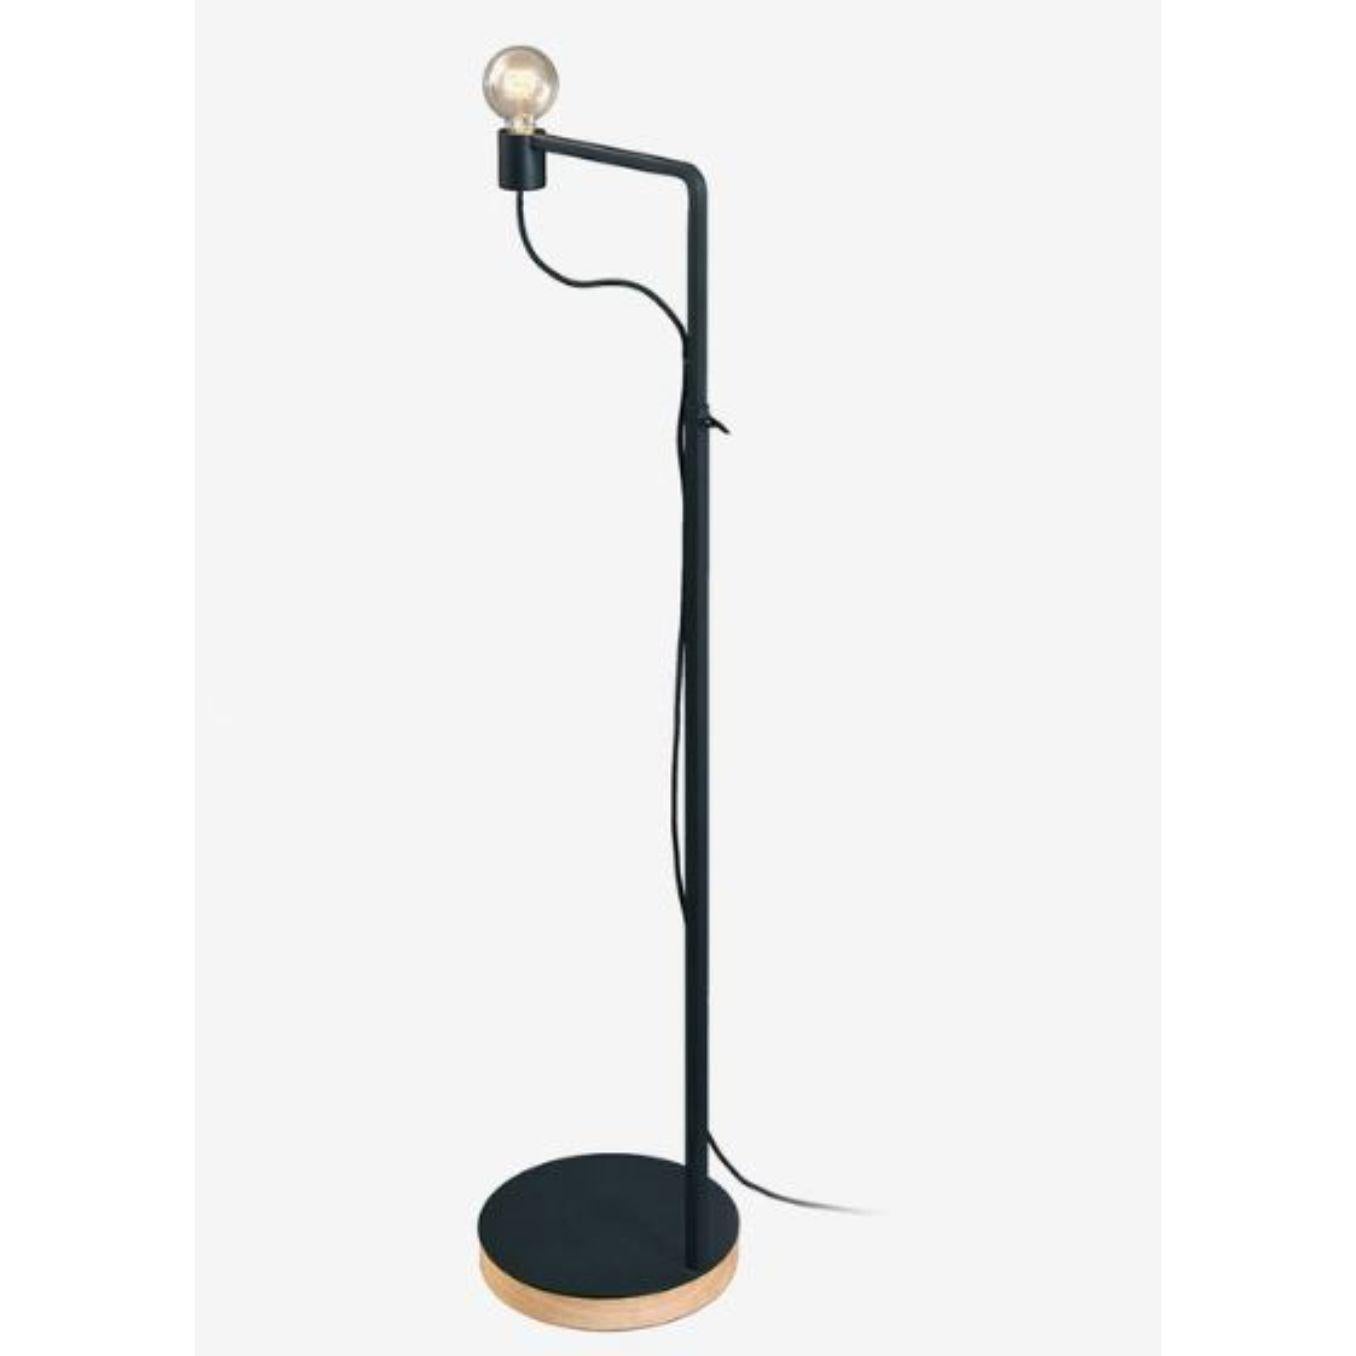 Grafit floor lamp by Radar.
Design: Bastien Taillard.
Materials: Metal, oak.
Dimensions: W 30 x D 30 x H 110-170 cm
Also available in solid oak (base).  

All our lamps can be wired according to each country. If sold to the USA it will be